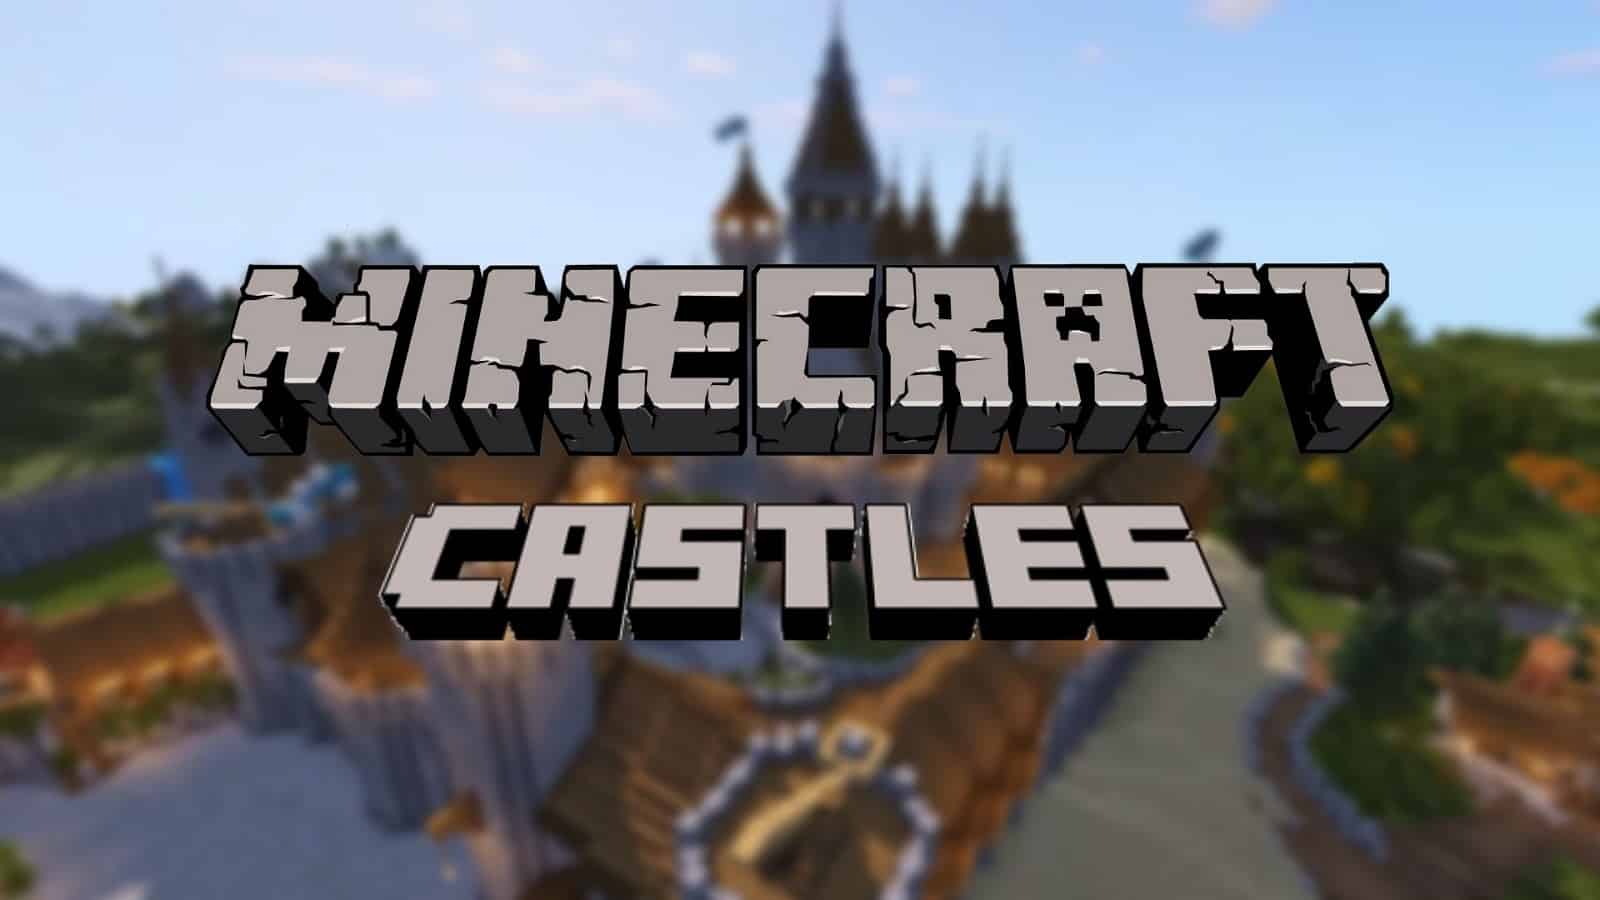 Someone crafted a redstone PC in Minecraft to play Minecraft inside  Minecraft